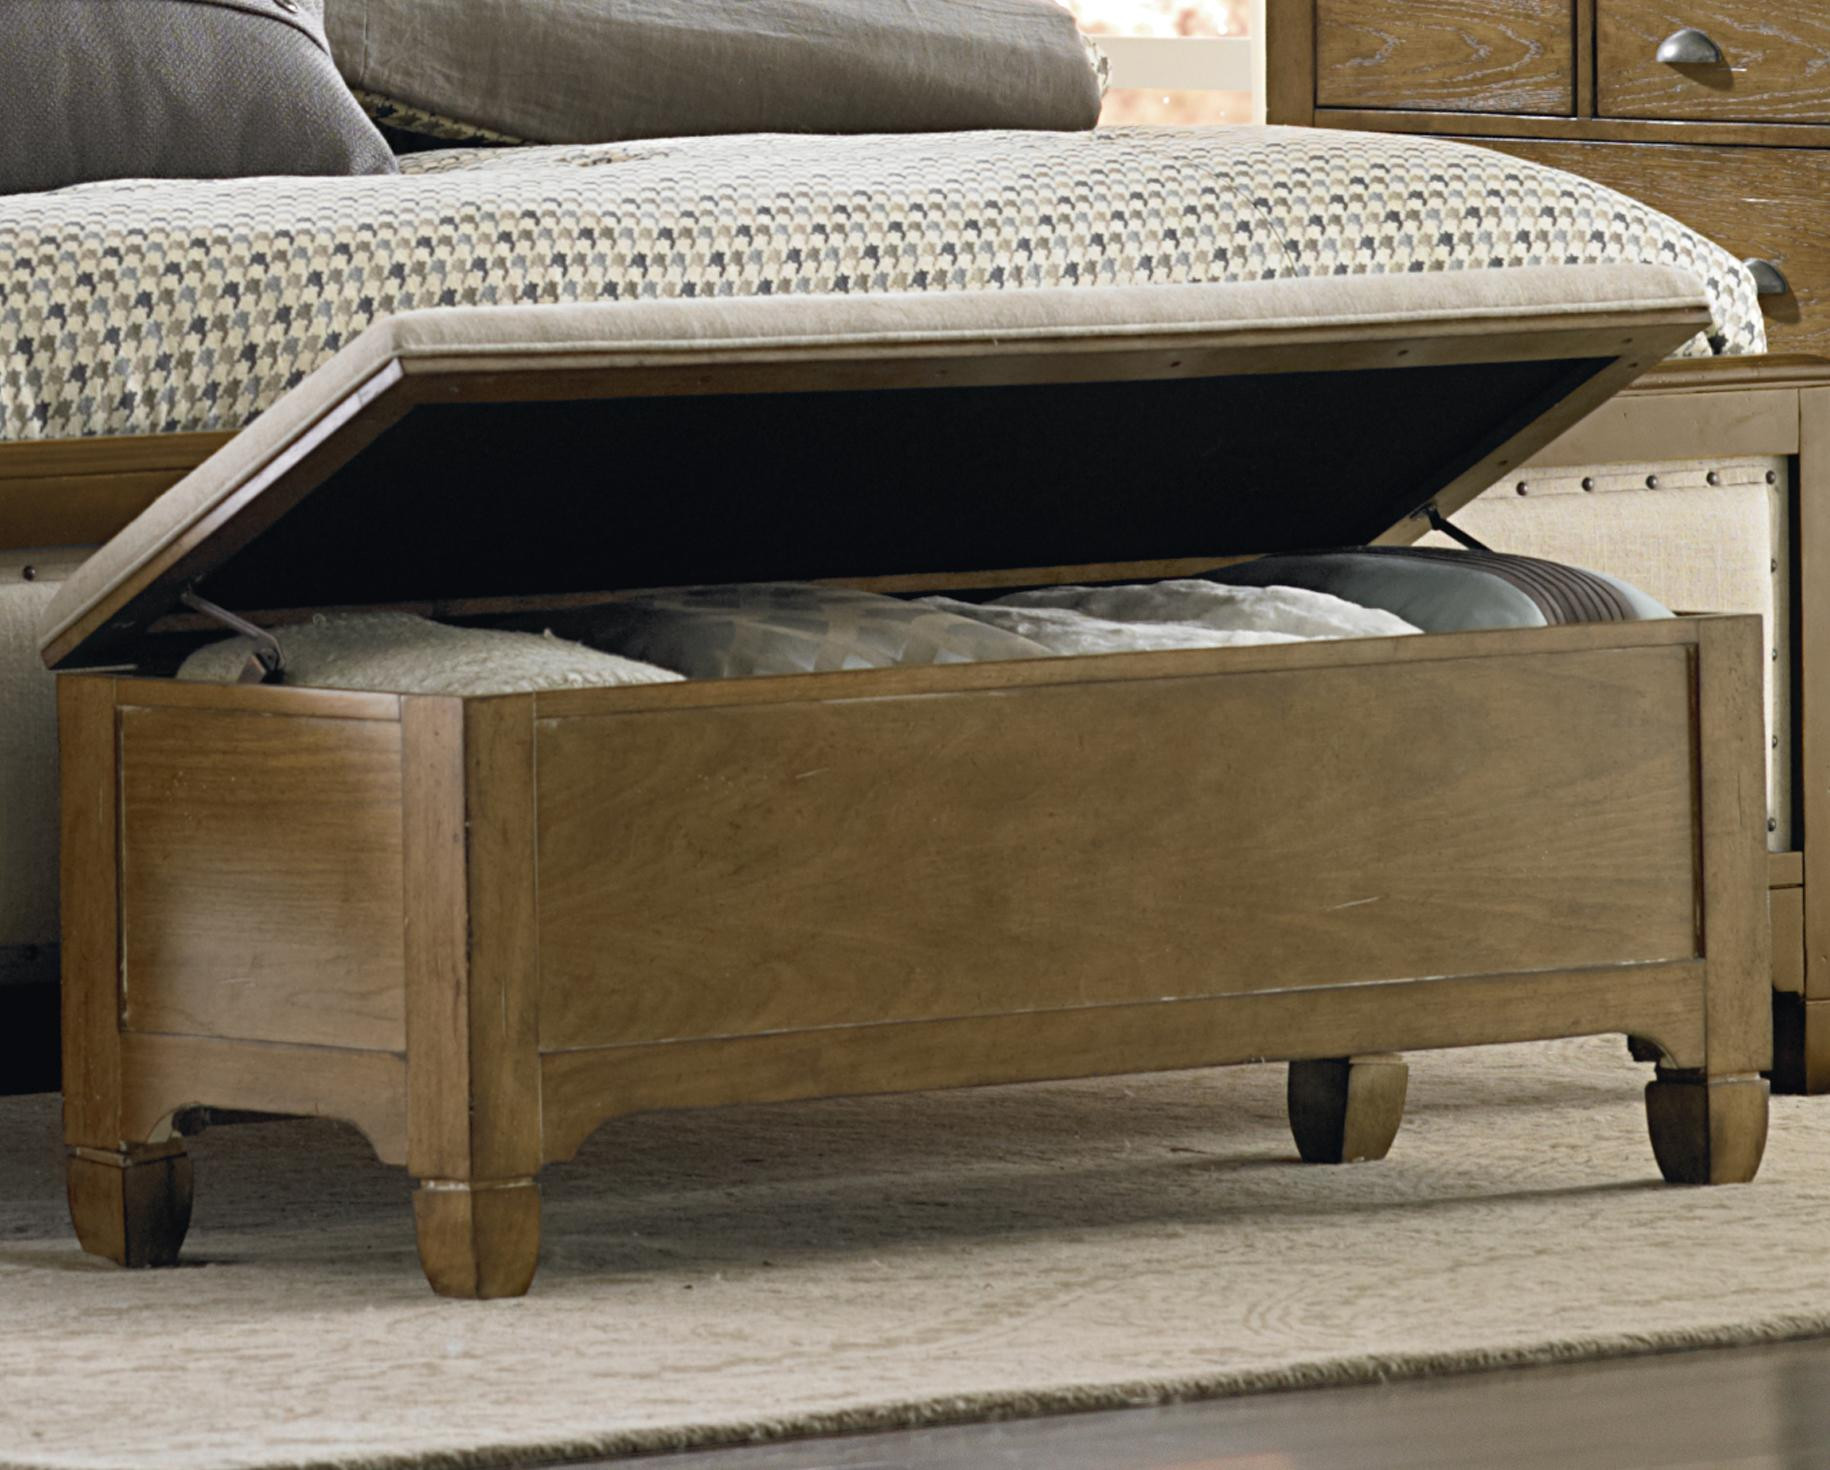 Bedroom Storage Bench: How To Choose The Perfect One For Your Home